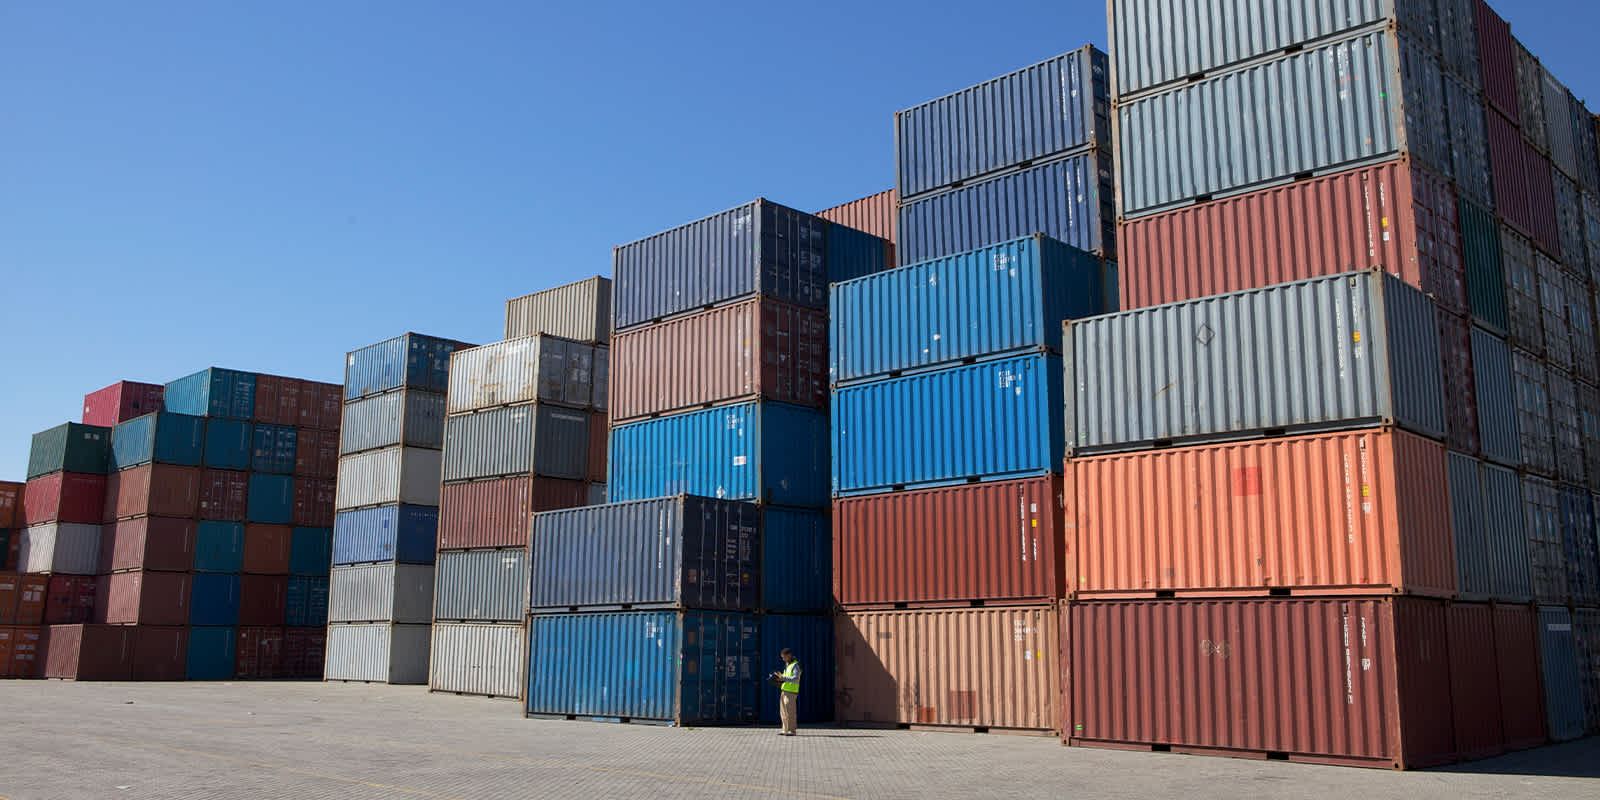 A labor and container shortage is wreaking havoc in the ocean market.